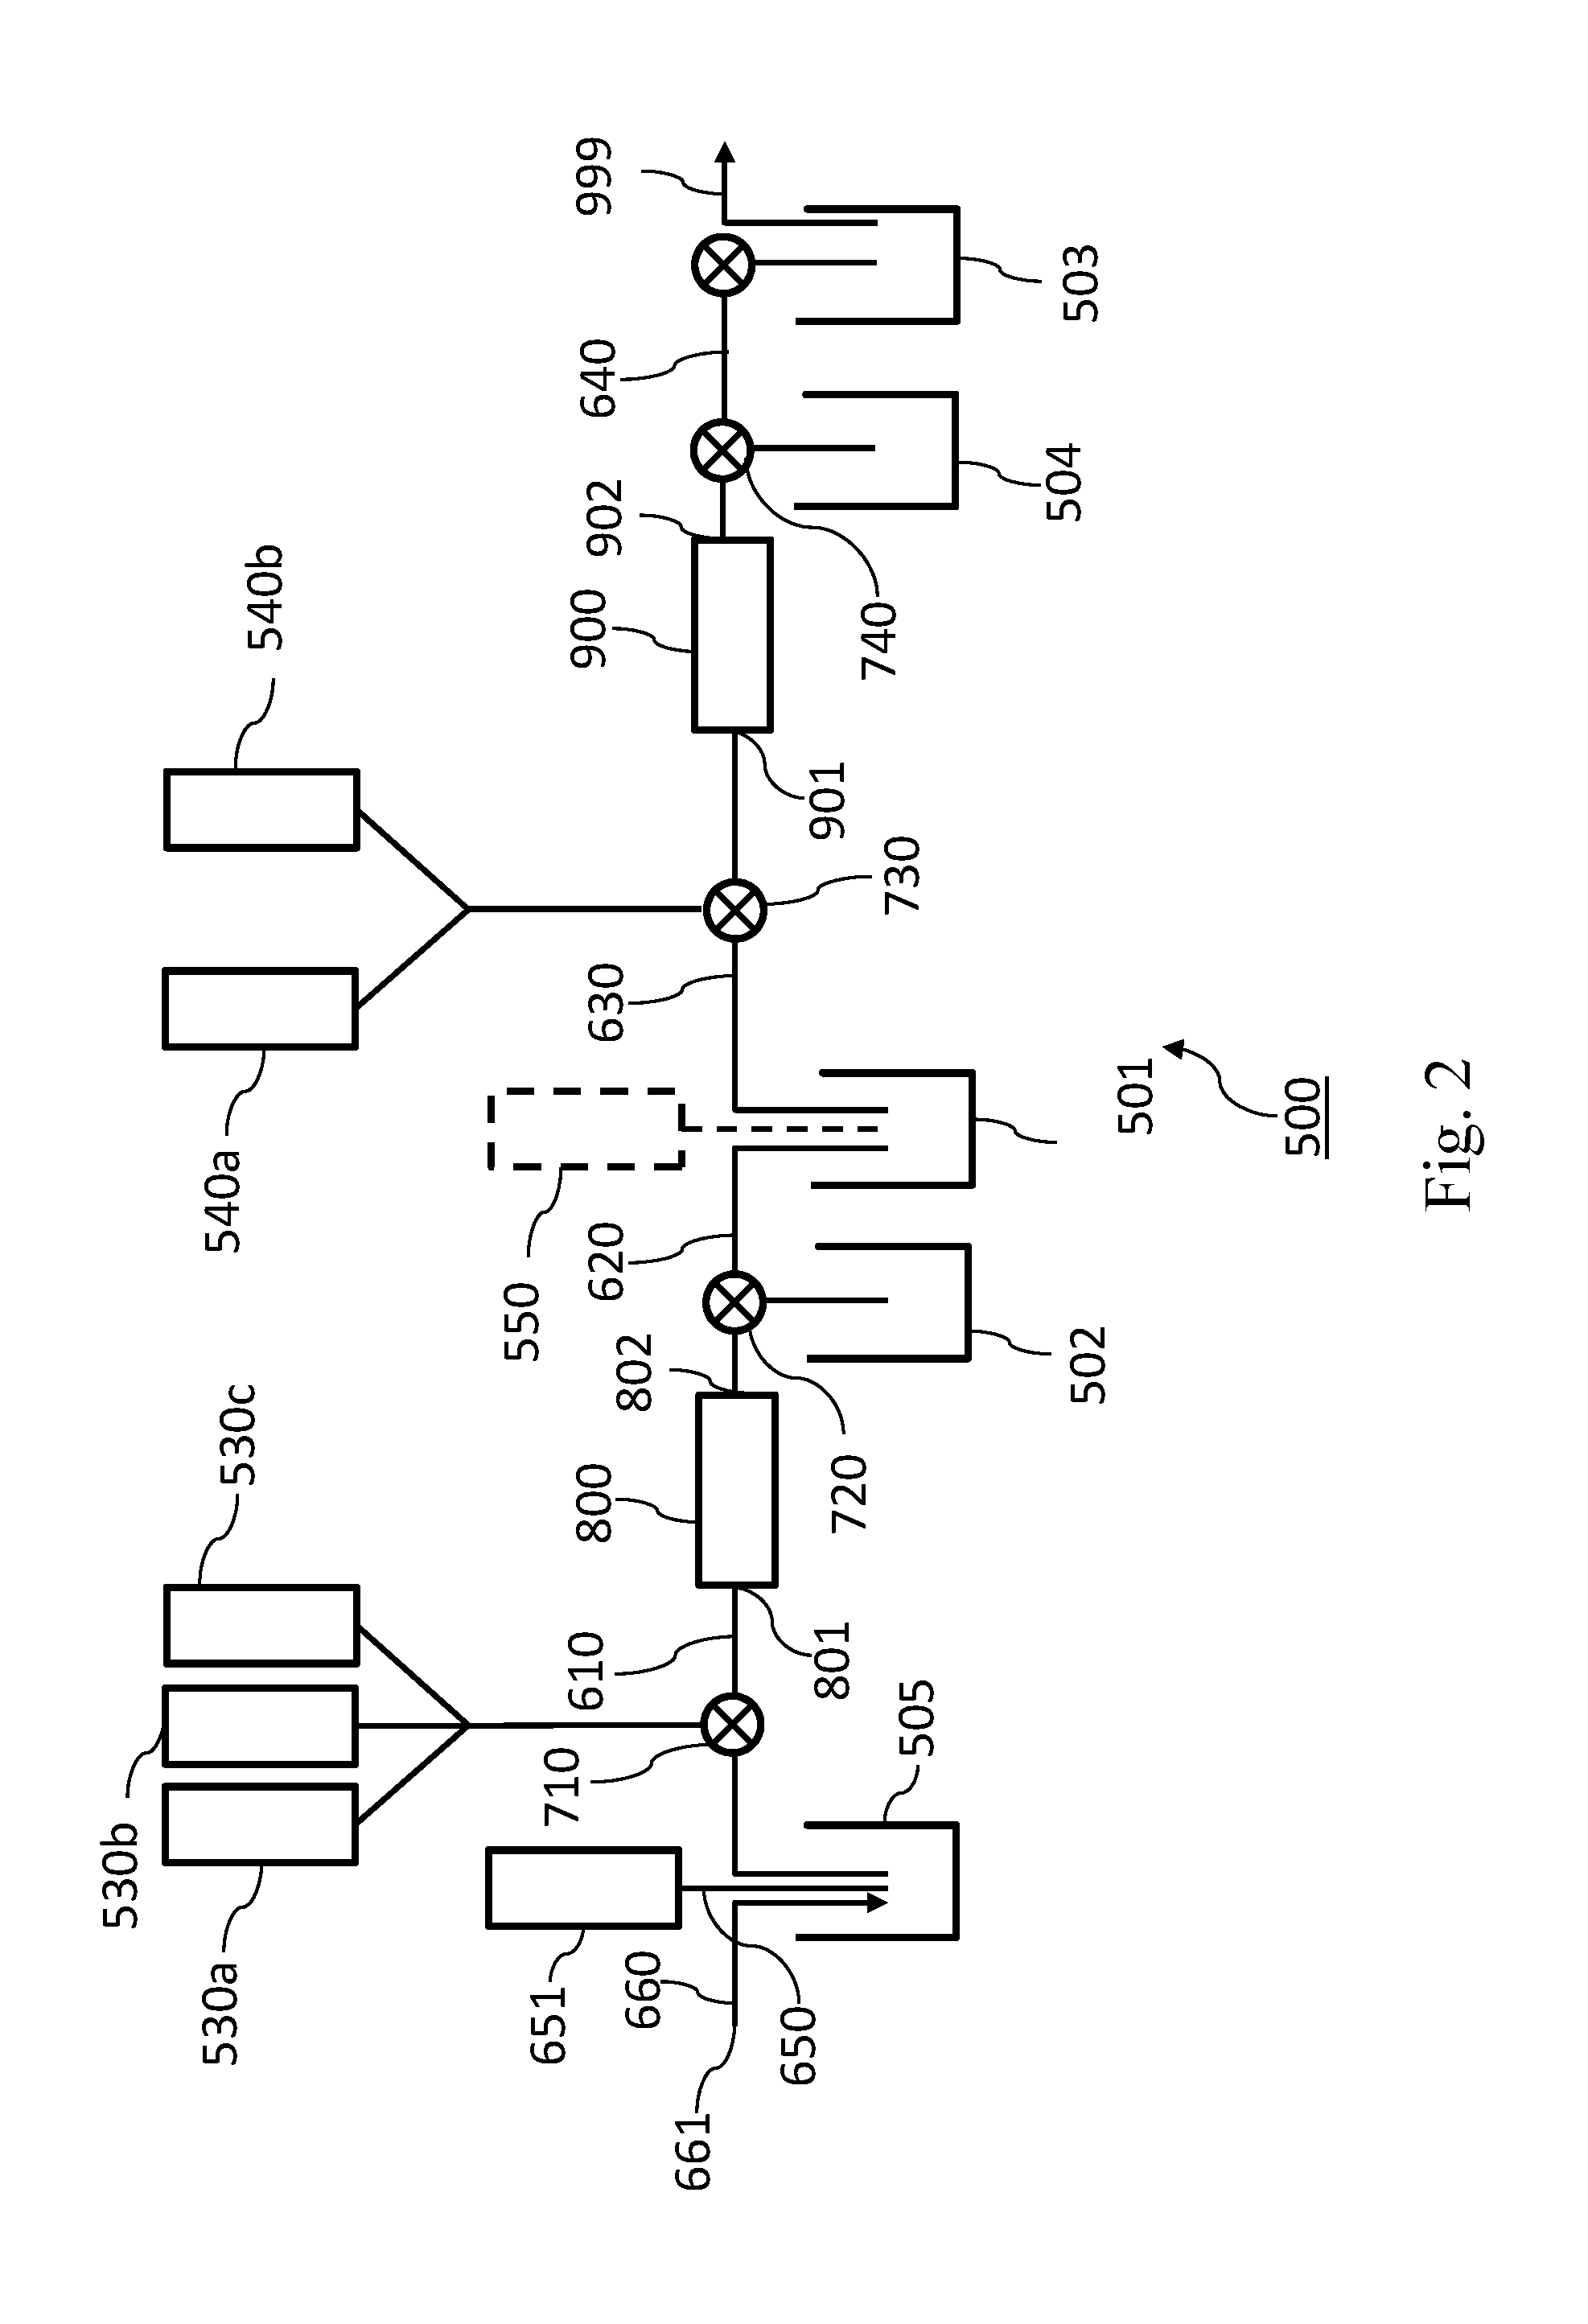 Process for producing gallium-68 through the irradiation of a solution target